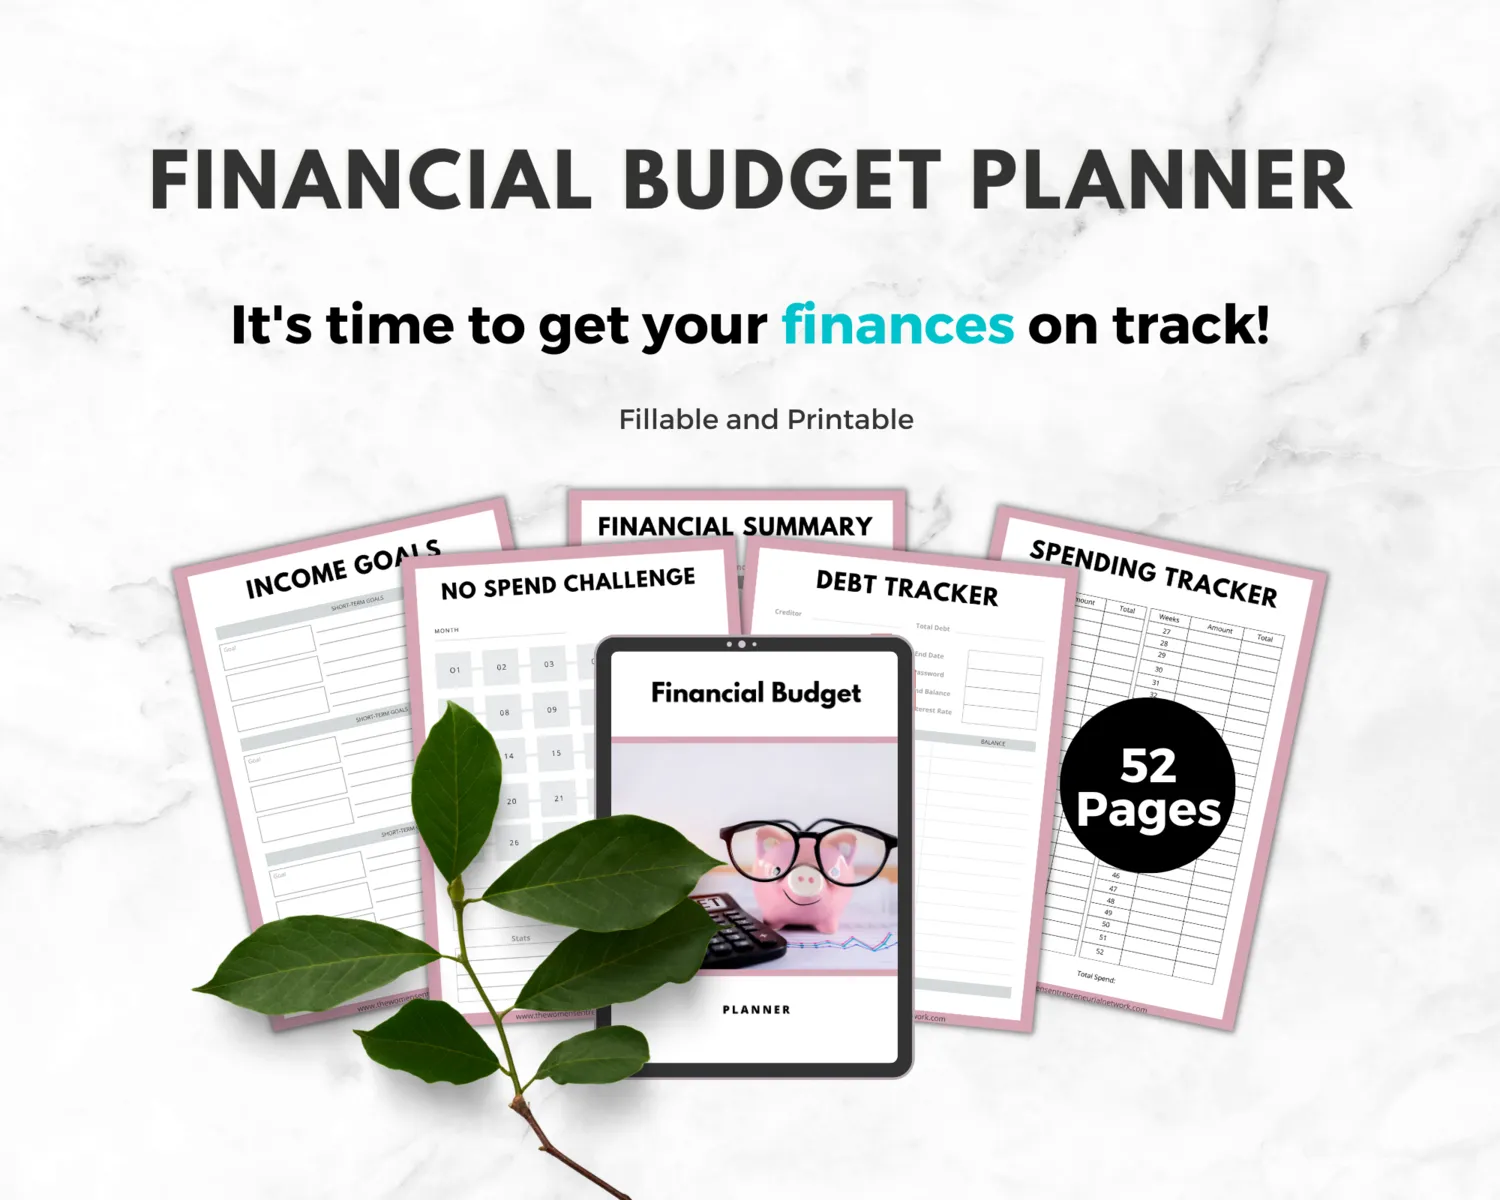 Financial Planner | Take Control of Your Finances, Achieve Savings Goals, and Build Wealth